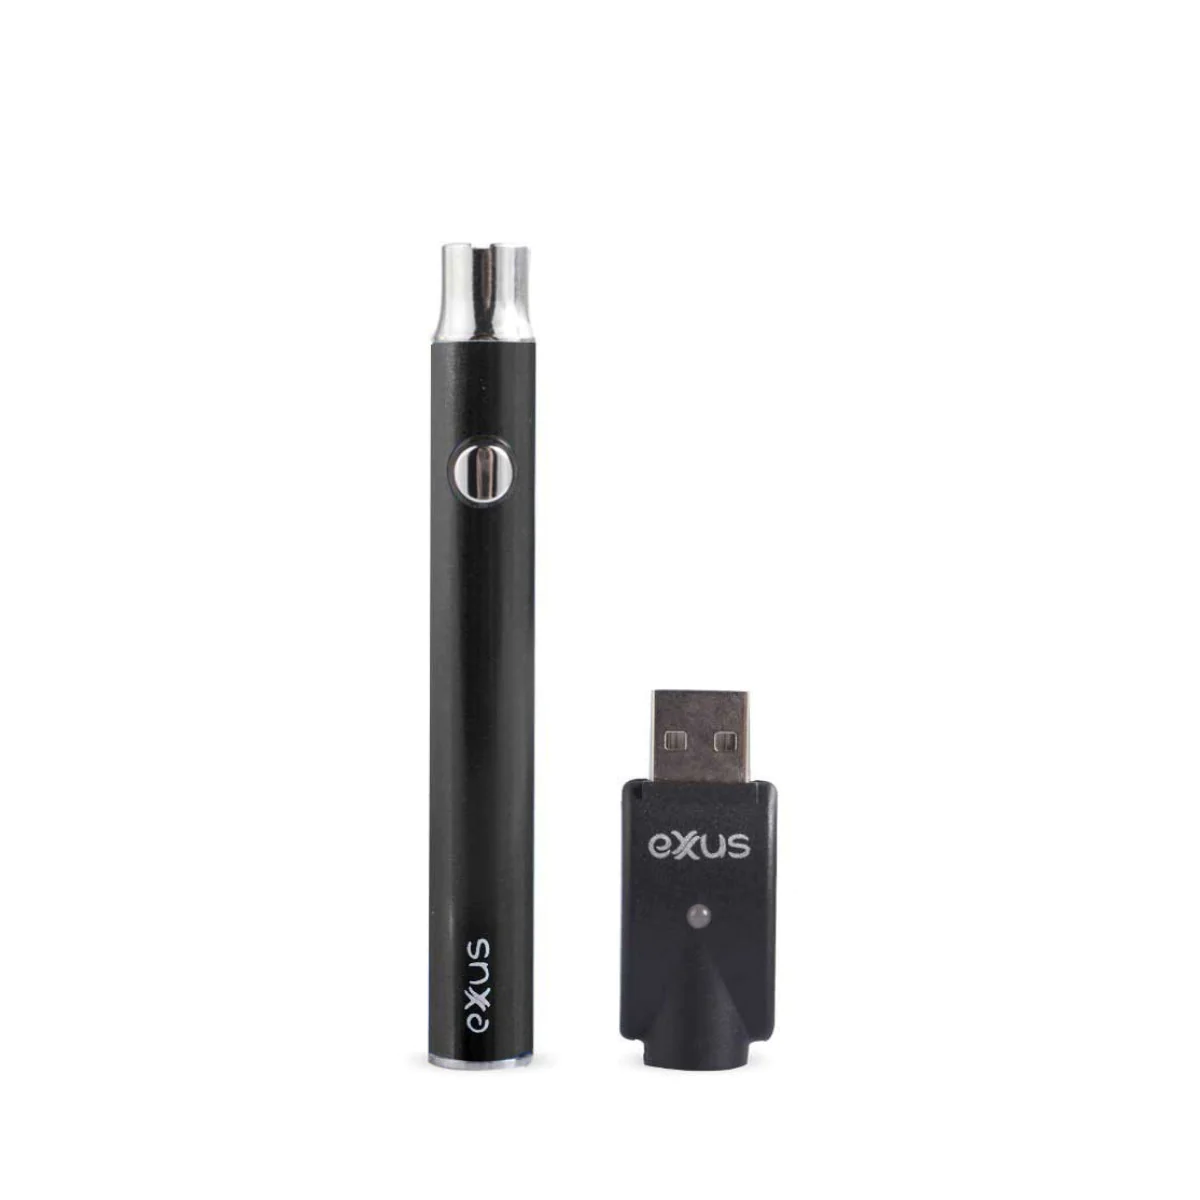 Cartridge Vaporizers By One Stoppipe Shop-In Depth Review The Top Cartridge Vaporizers